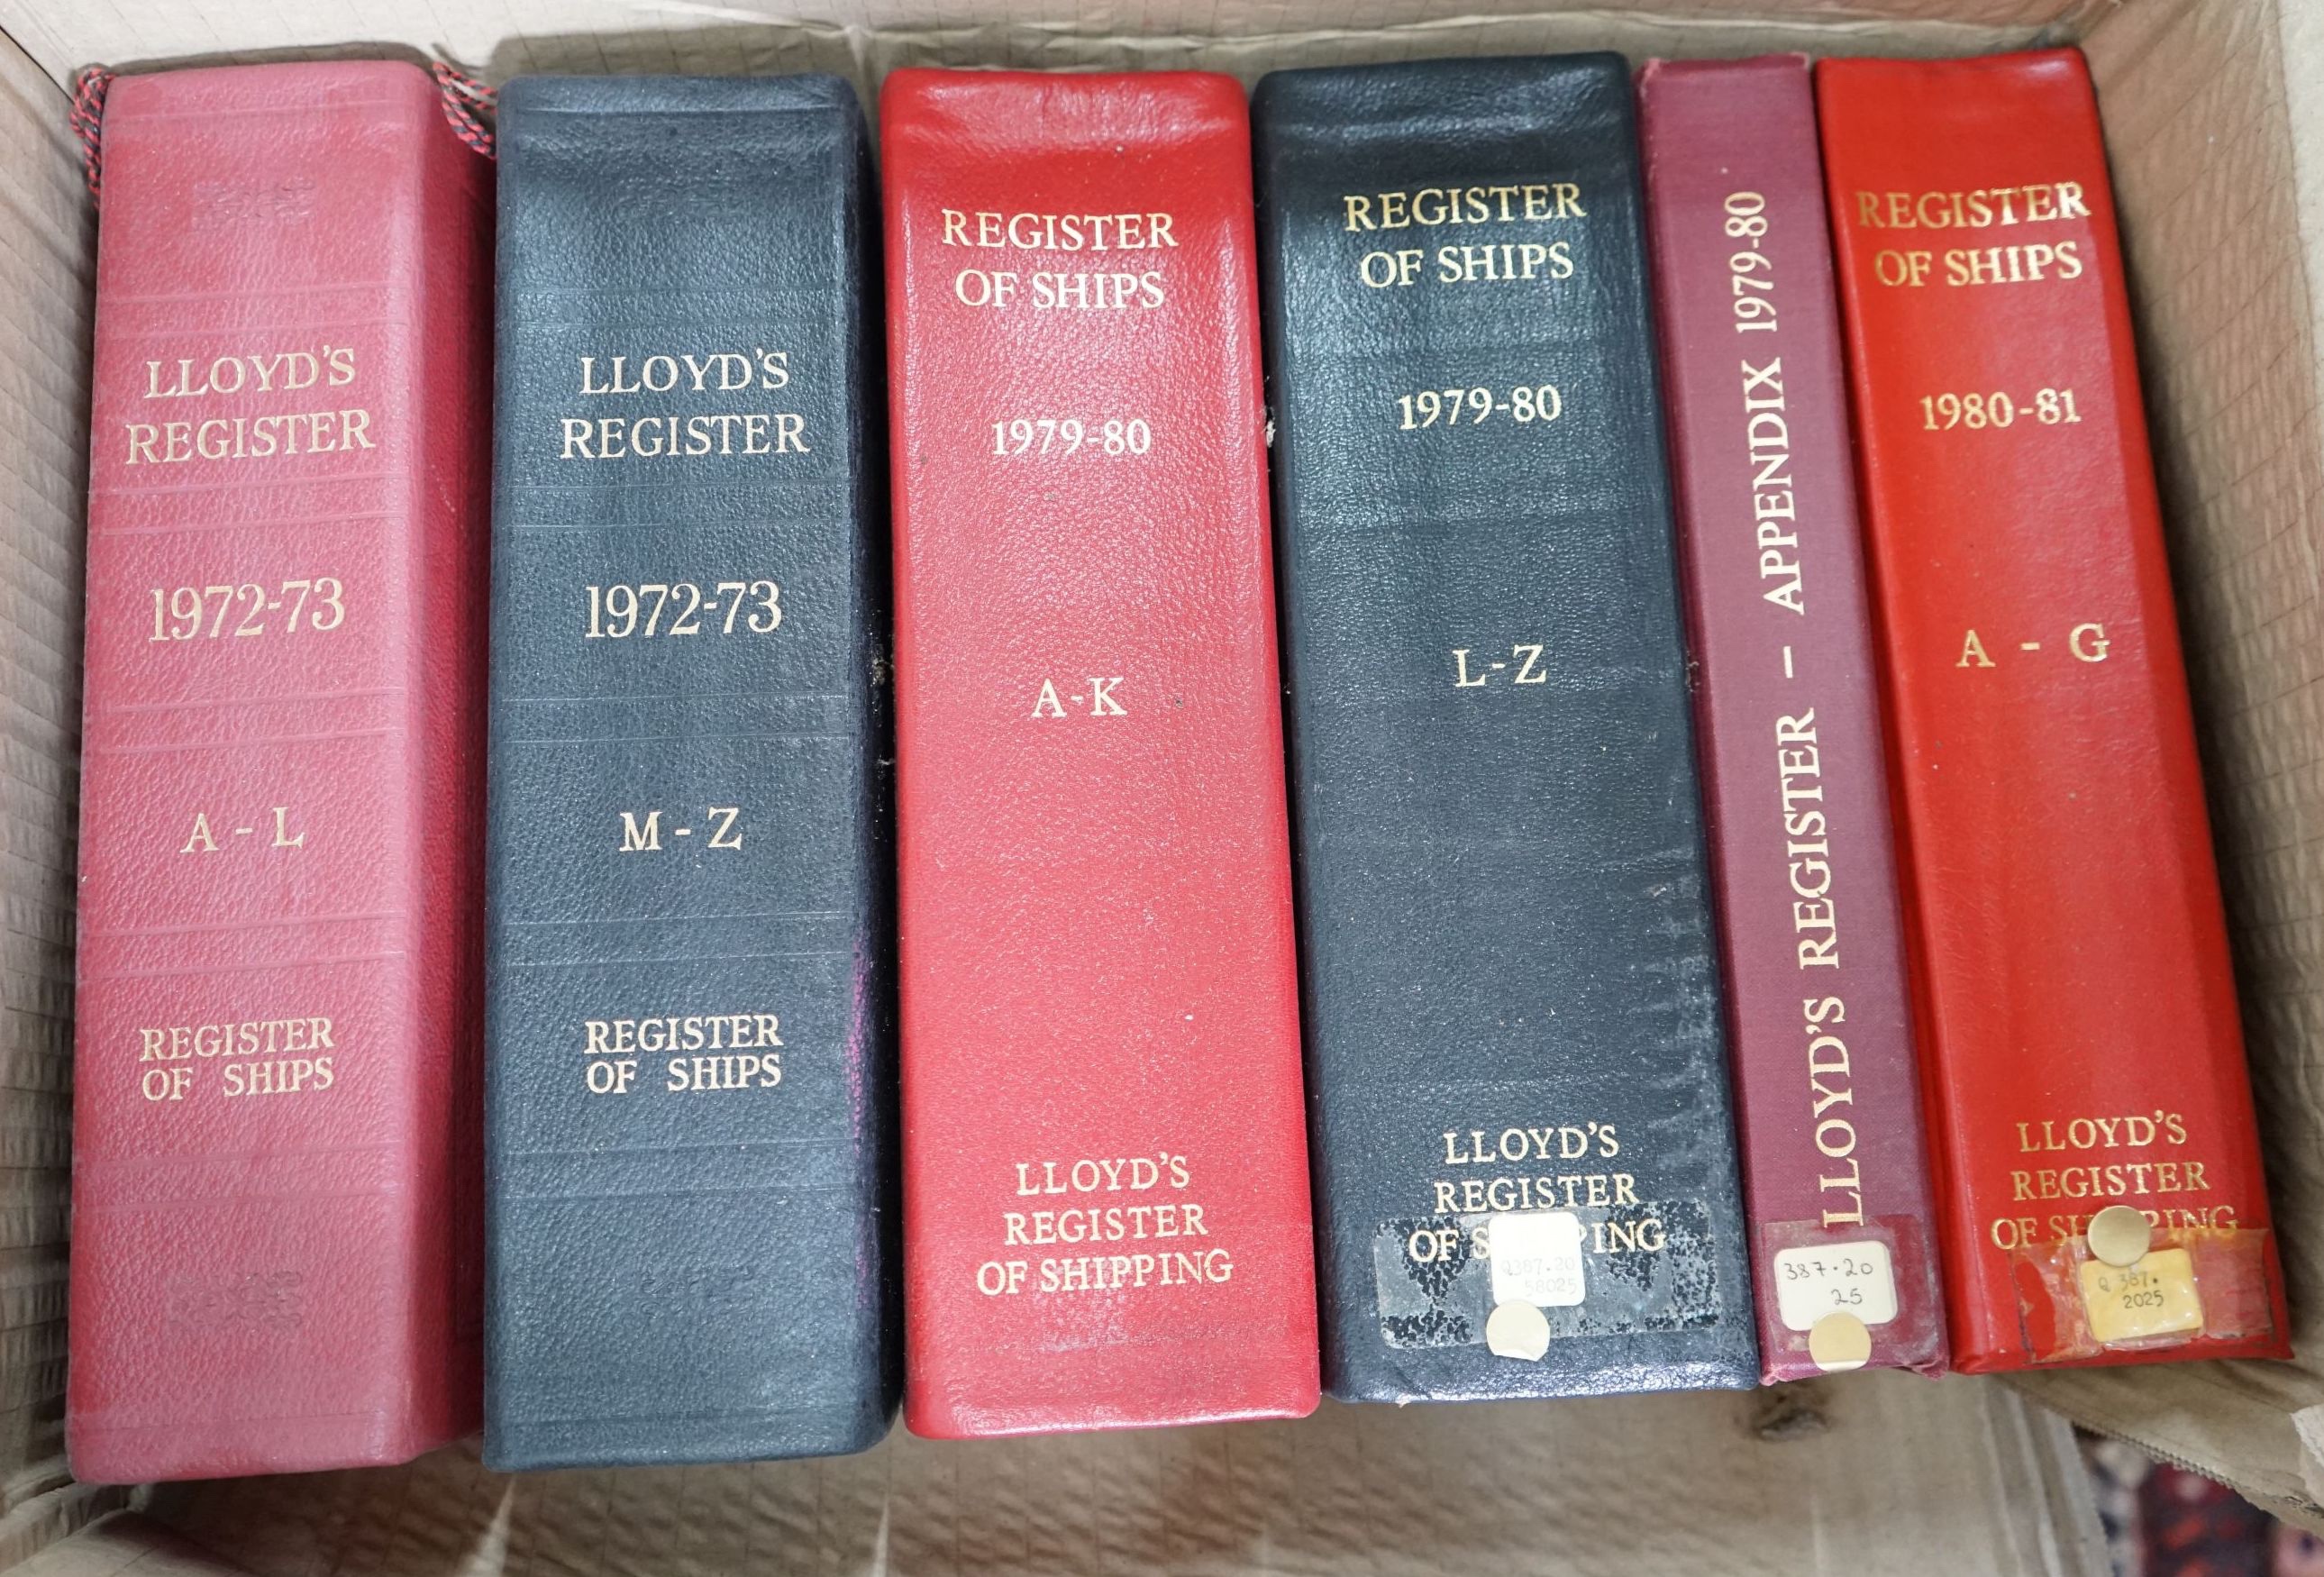 Lloyds Register of Ships, mid to late 20th century in approximately 75 bindings